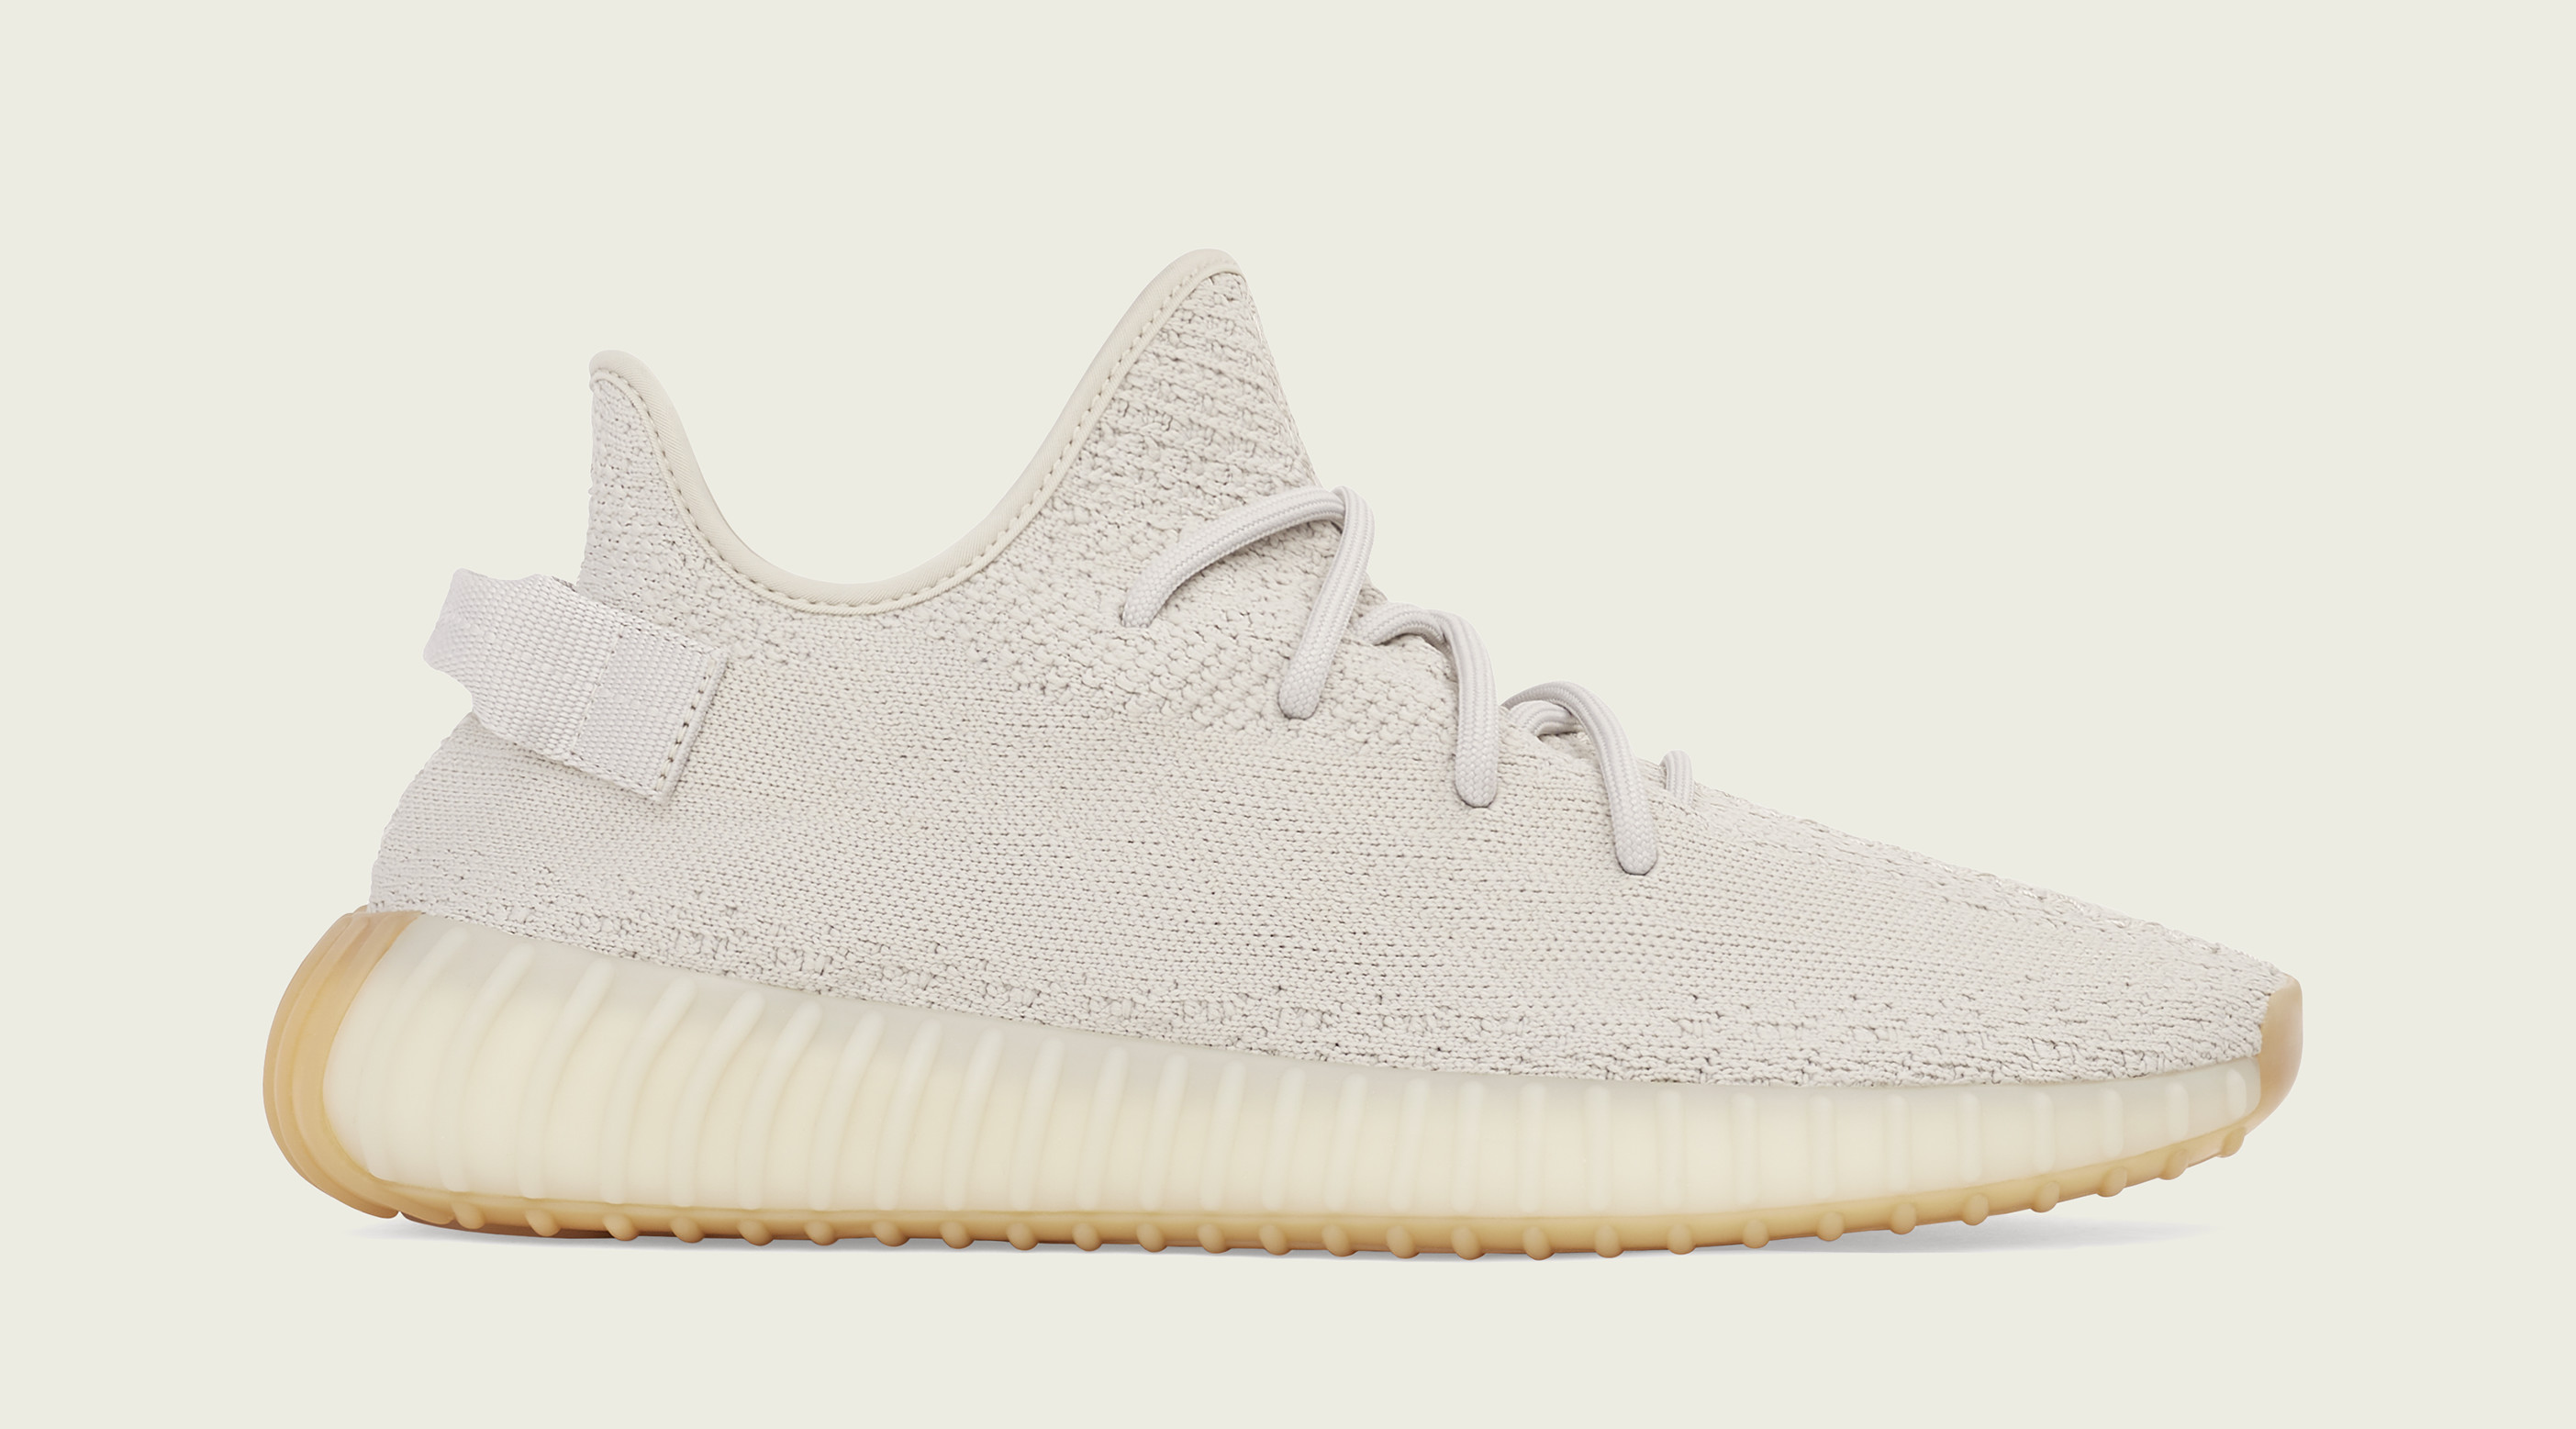 Adidas Confirms Release Date for the 'Sesame' Yeezy Boost 350 V2